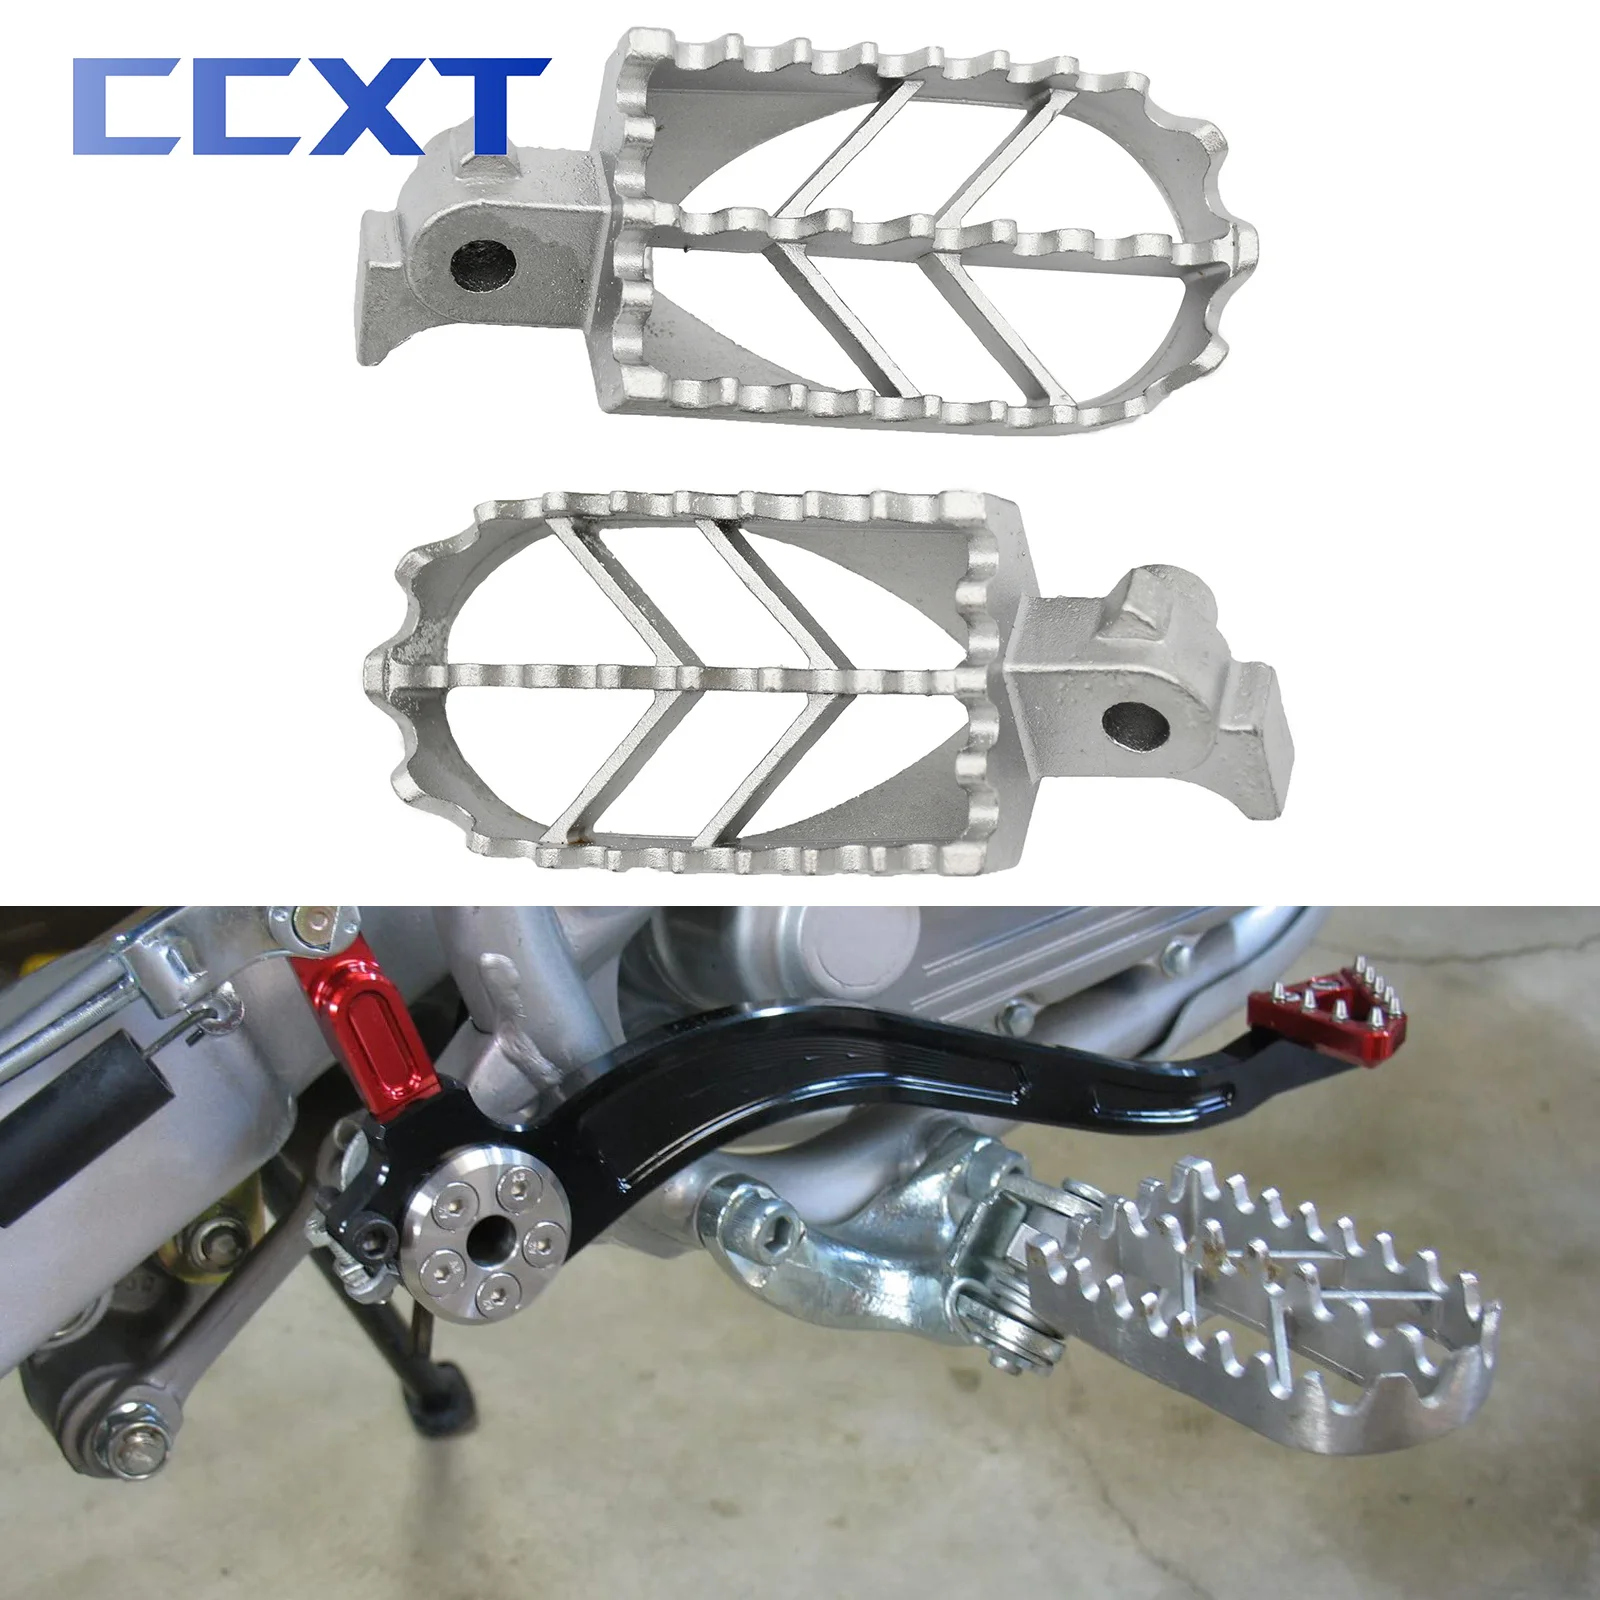 Motorcycle Stainless Steel Rests Pedals Foot Pegs For Honda CRF50 XR50 X... - $28.70